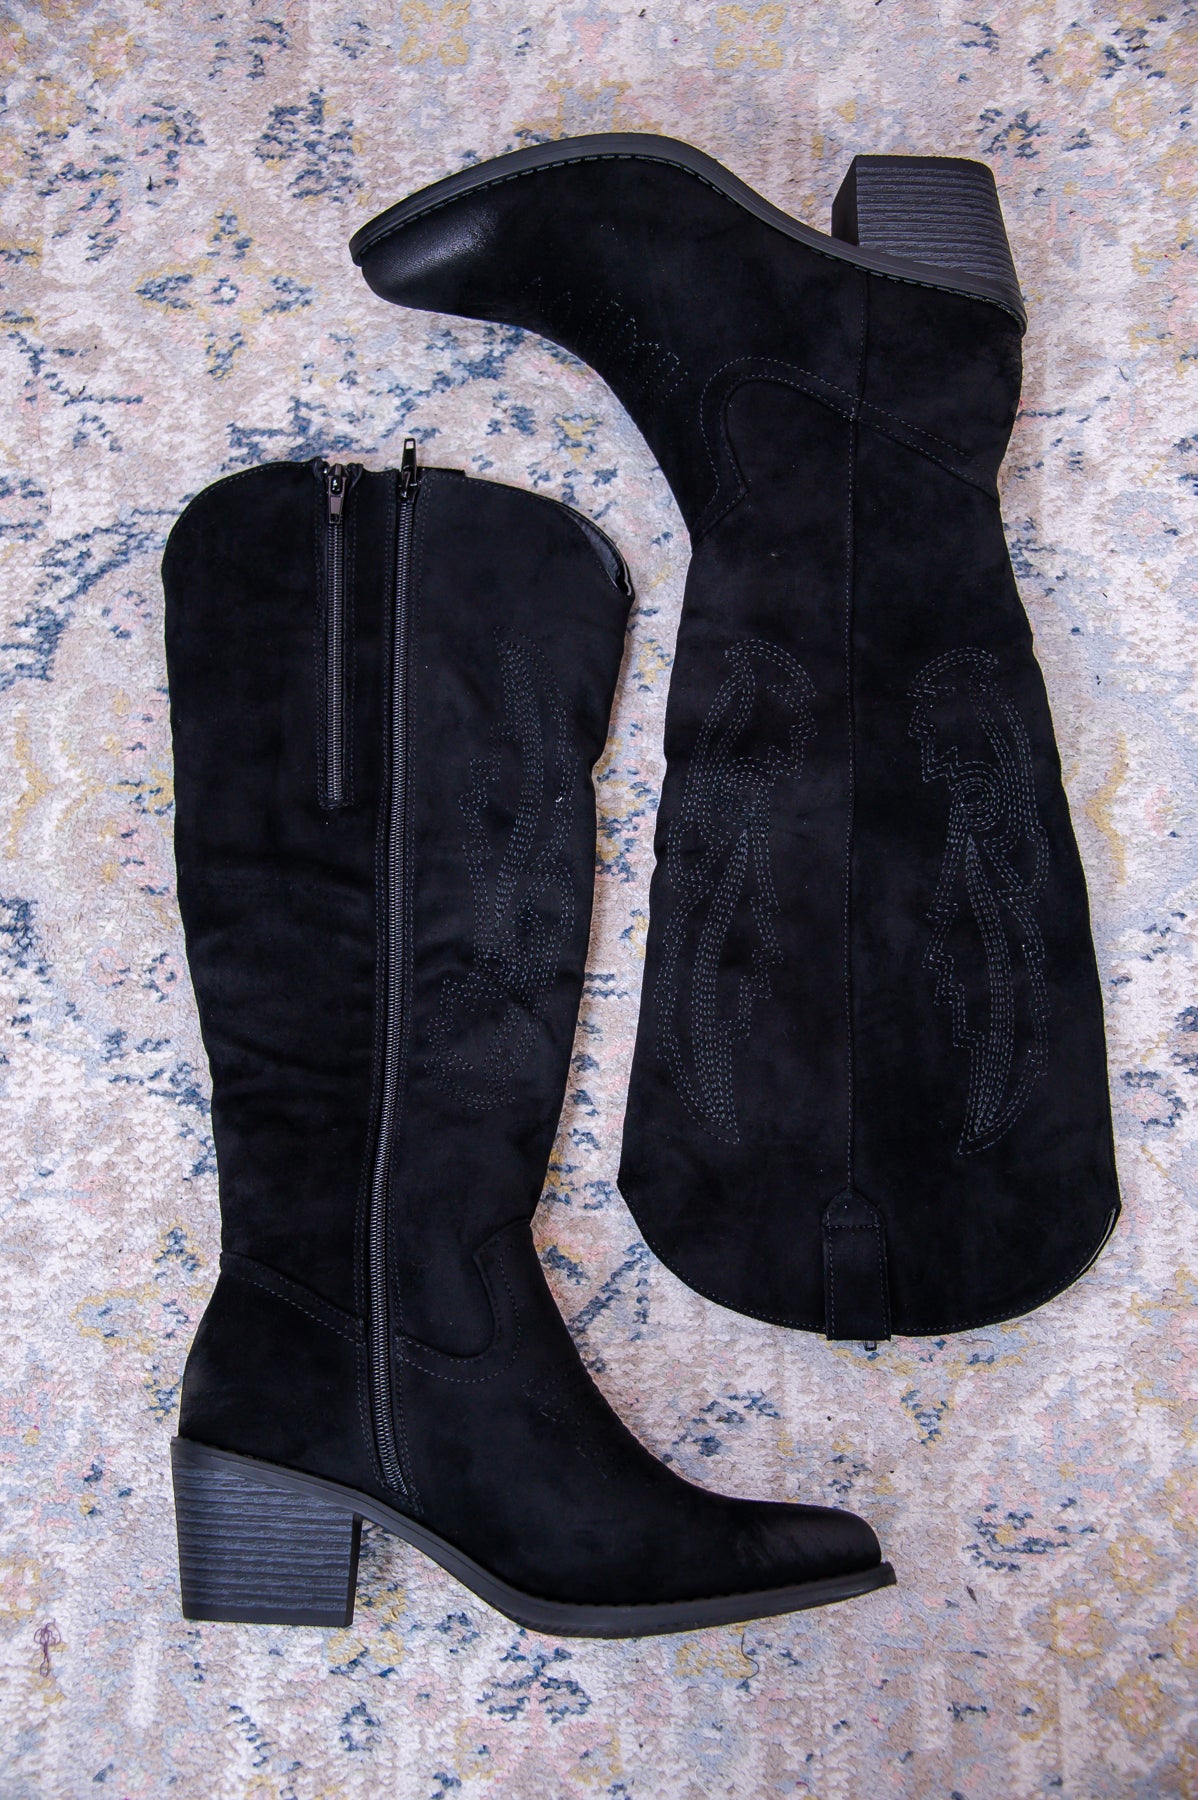 Boots Class And A Little Sass Black Solid Suede Cowgirl Boots - SHO2630BK